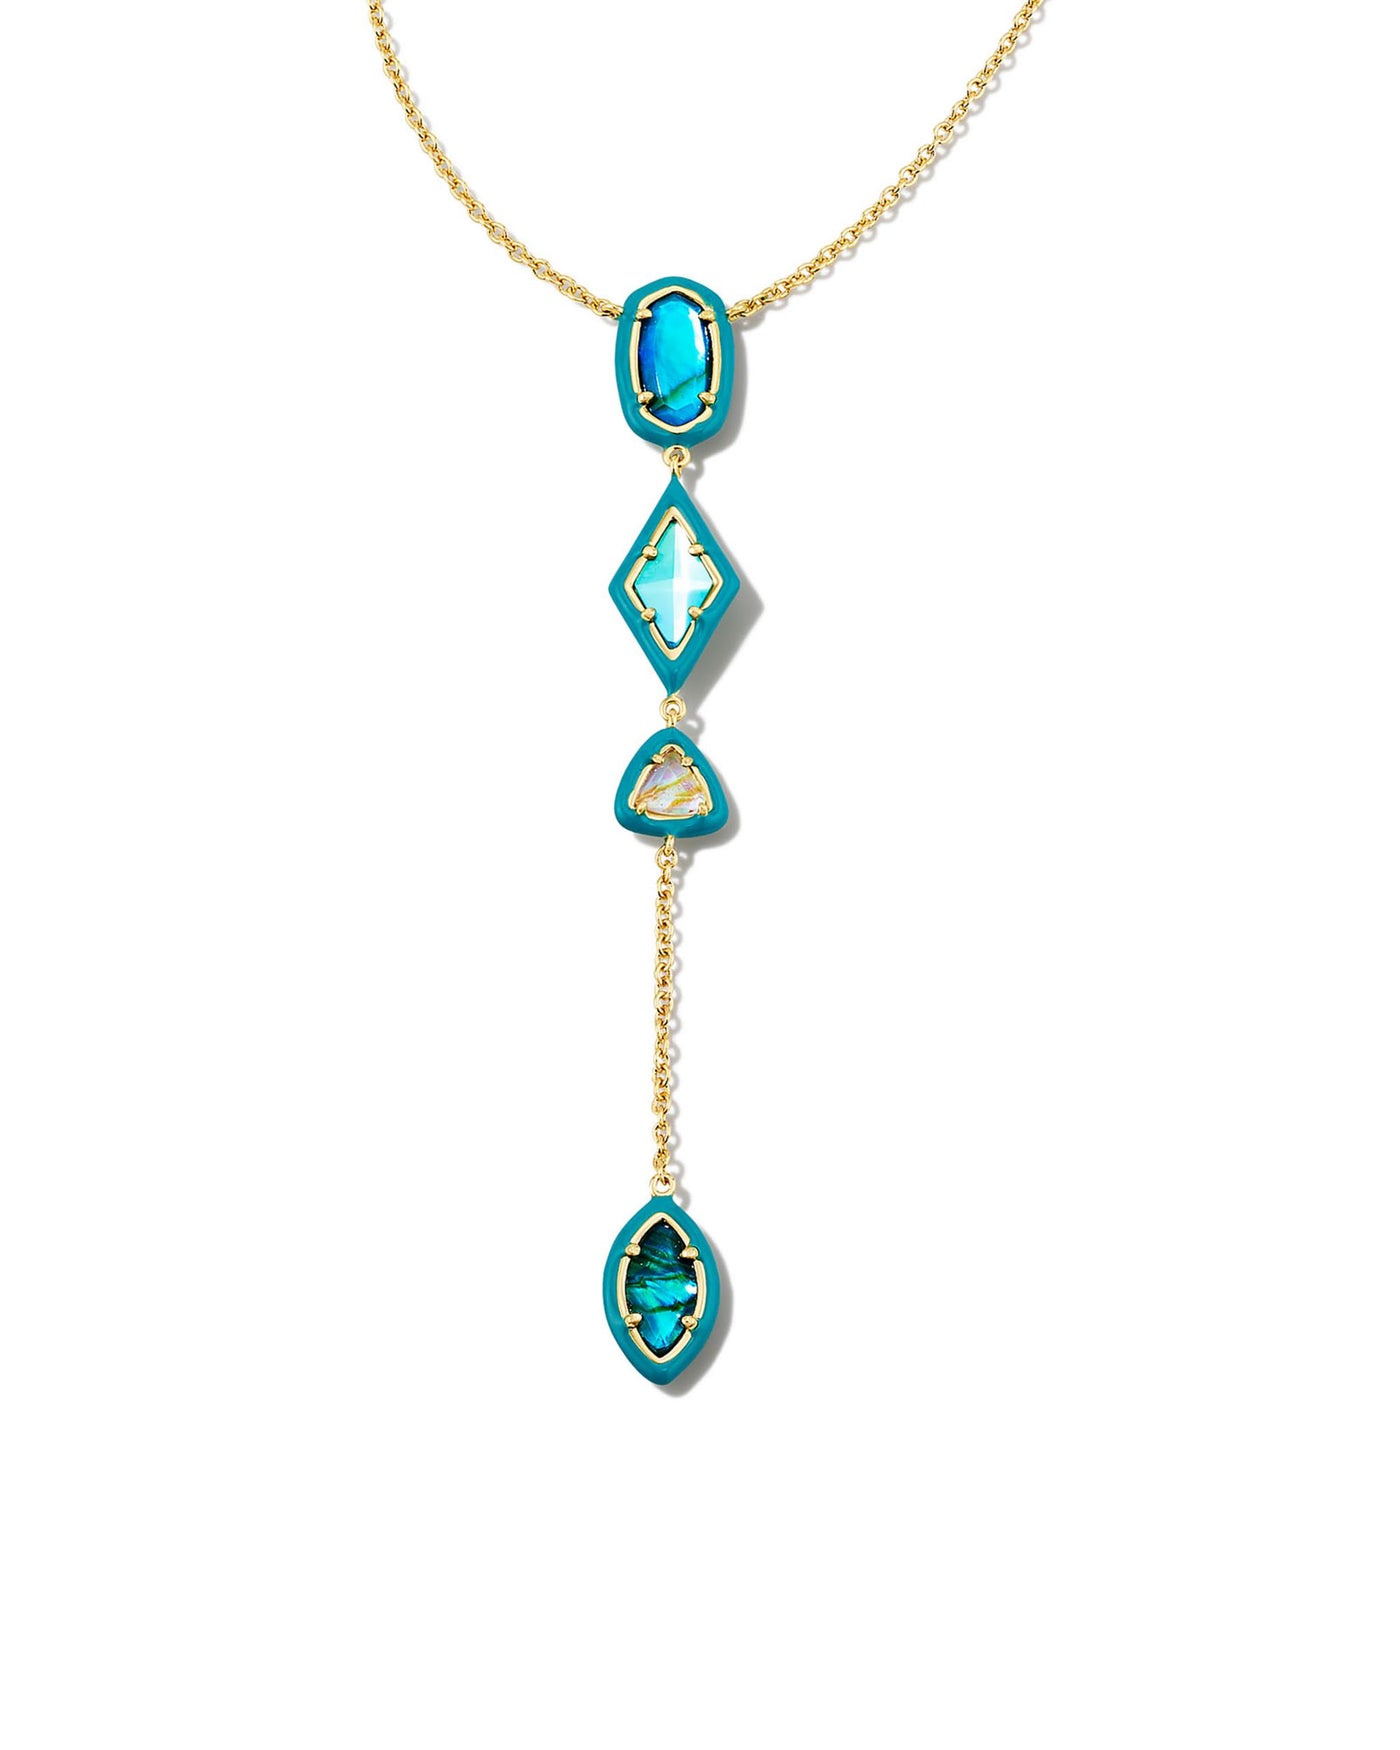 Gold Tone Necklace Featuring Ombre Teal Mix by Kendra Scott